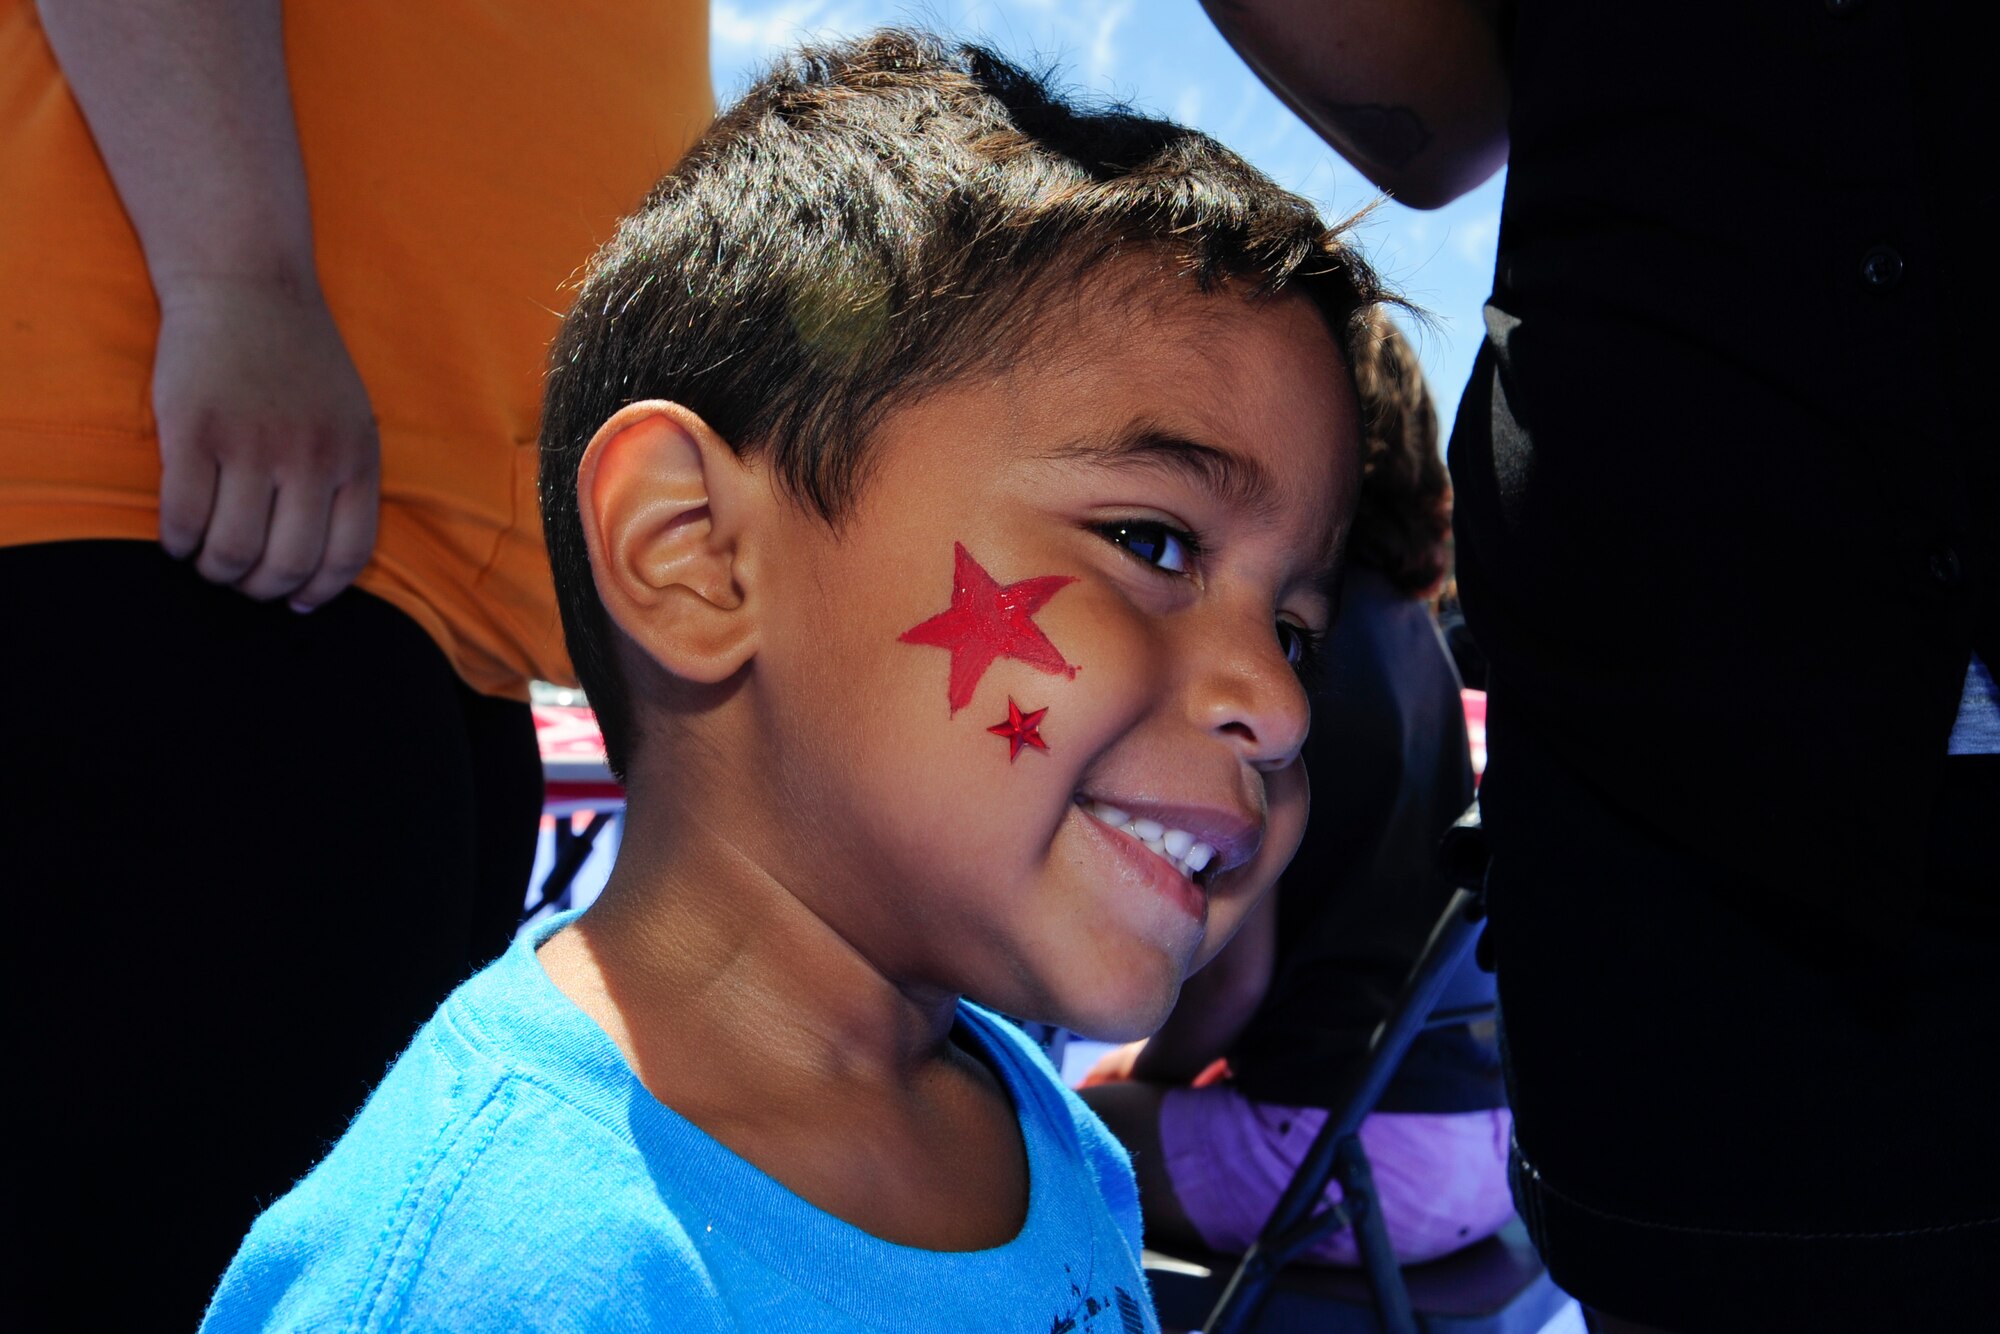 VANDENBERG AIR FORCE BASE, Calif. – Gabriel Peraza shows off his face painting during the 4th annual Salute to Youth event here Thursday, August 15, 2013. Salute to Youth was both an educational and family friendly event. It hosted the Exceptional Family Member Program, local schools, Backpack Brigade, food, games and prizes. (U.S. Air Force photo/Airman Yvonne Morales)